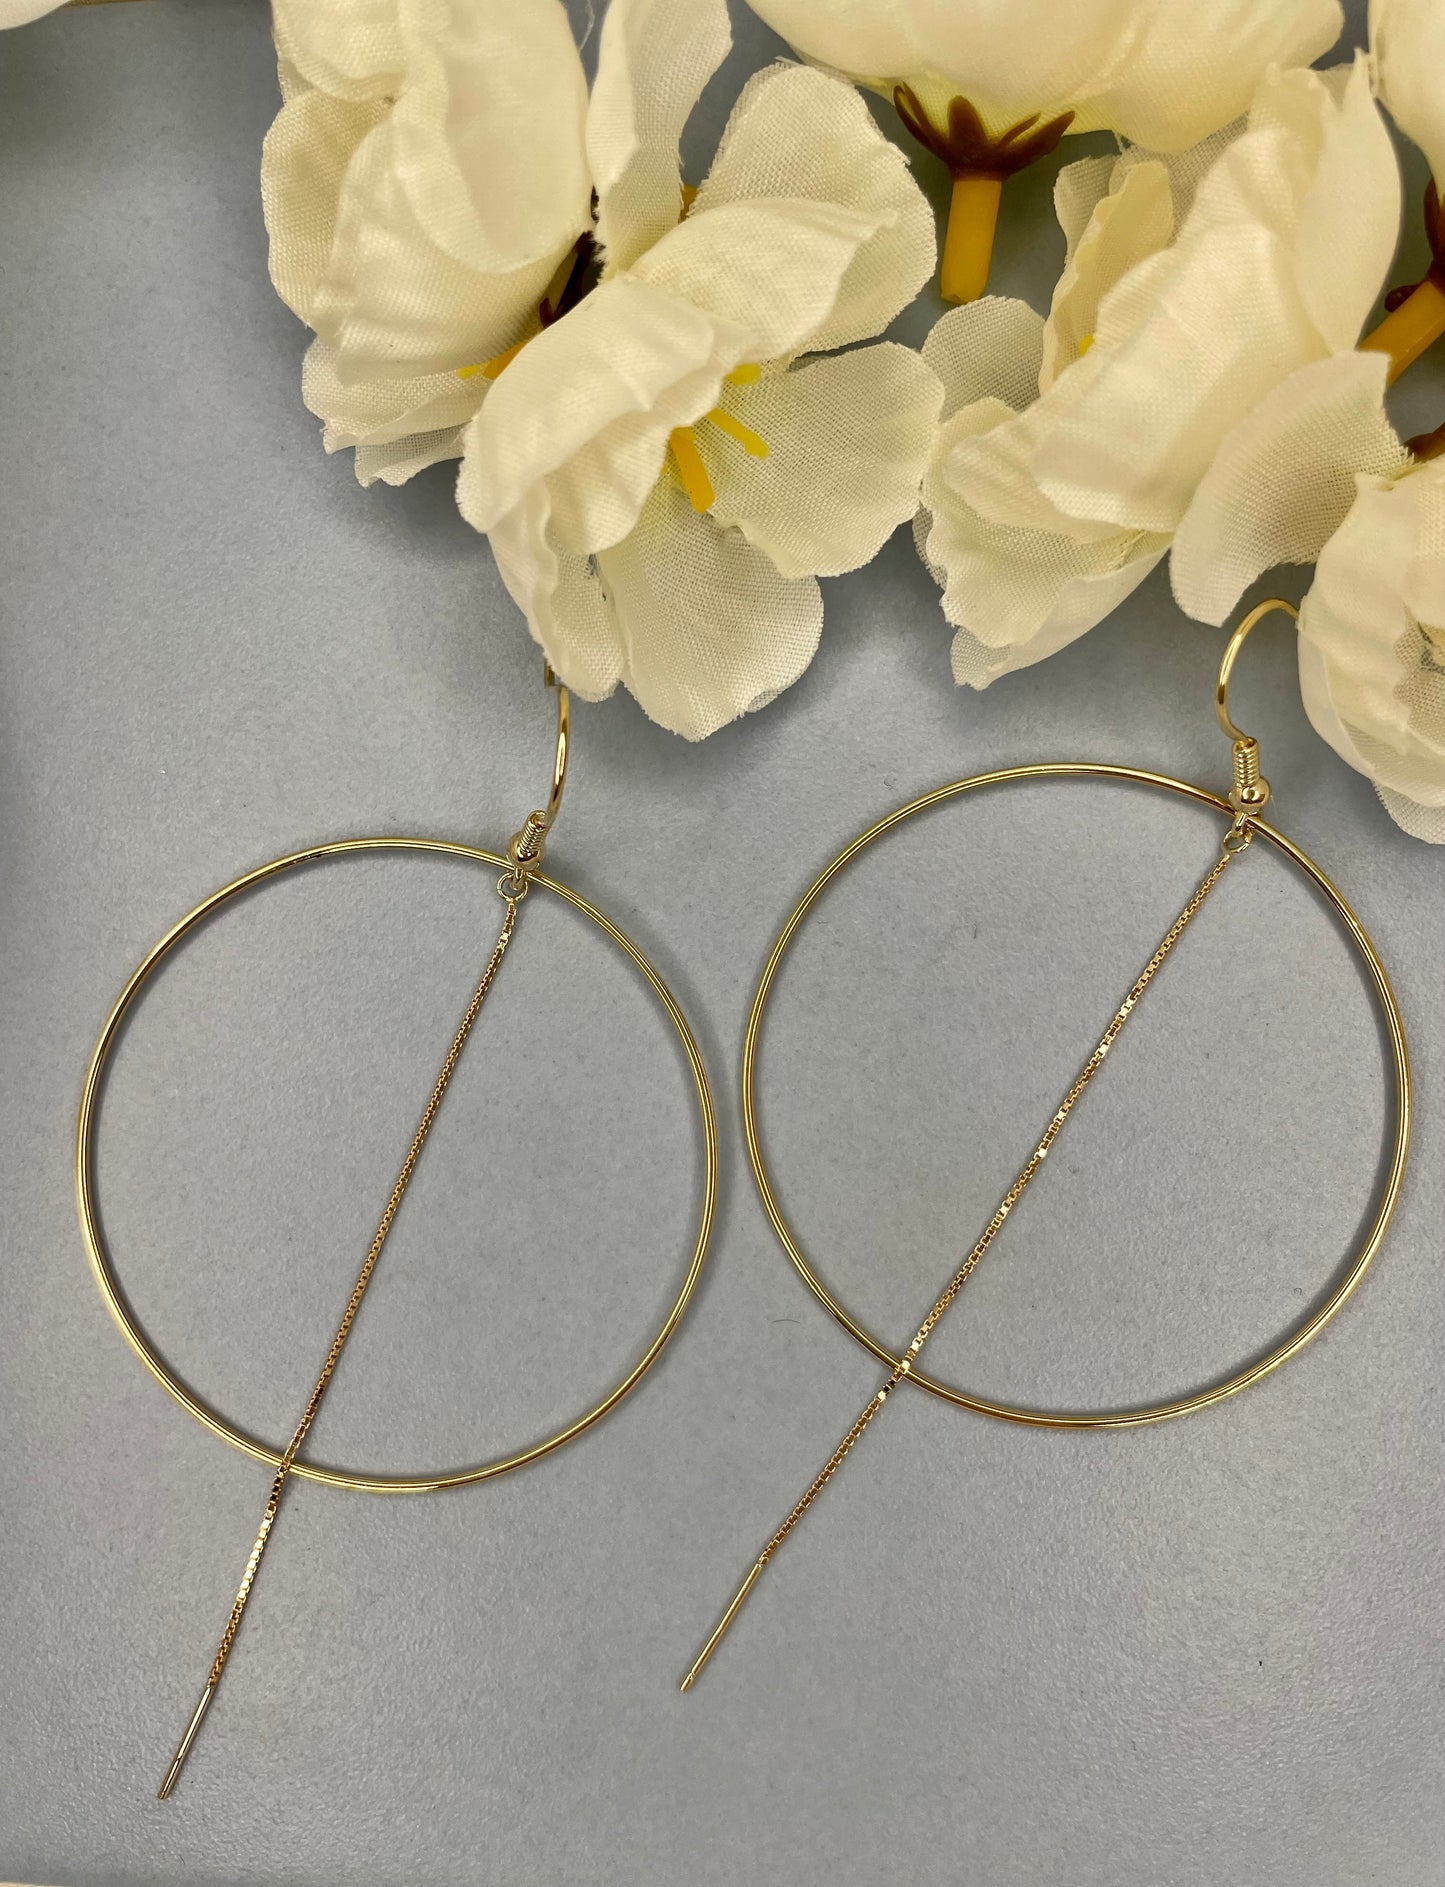 9ct Yellow Gold Hoop Earrings with drop chain detail